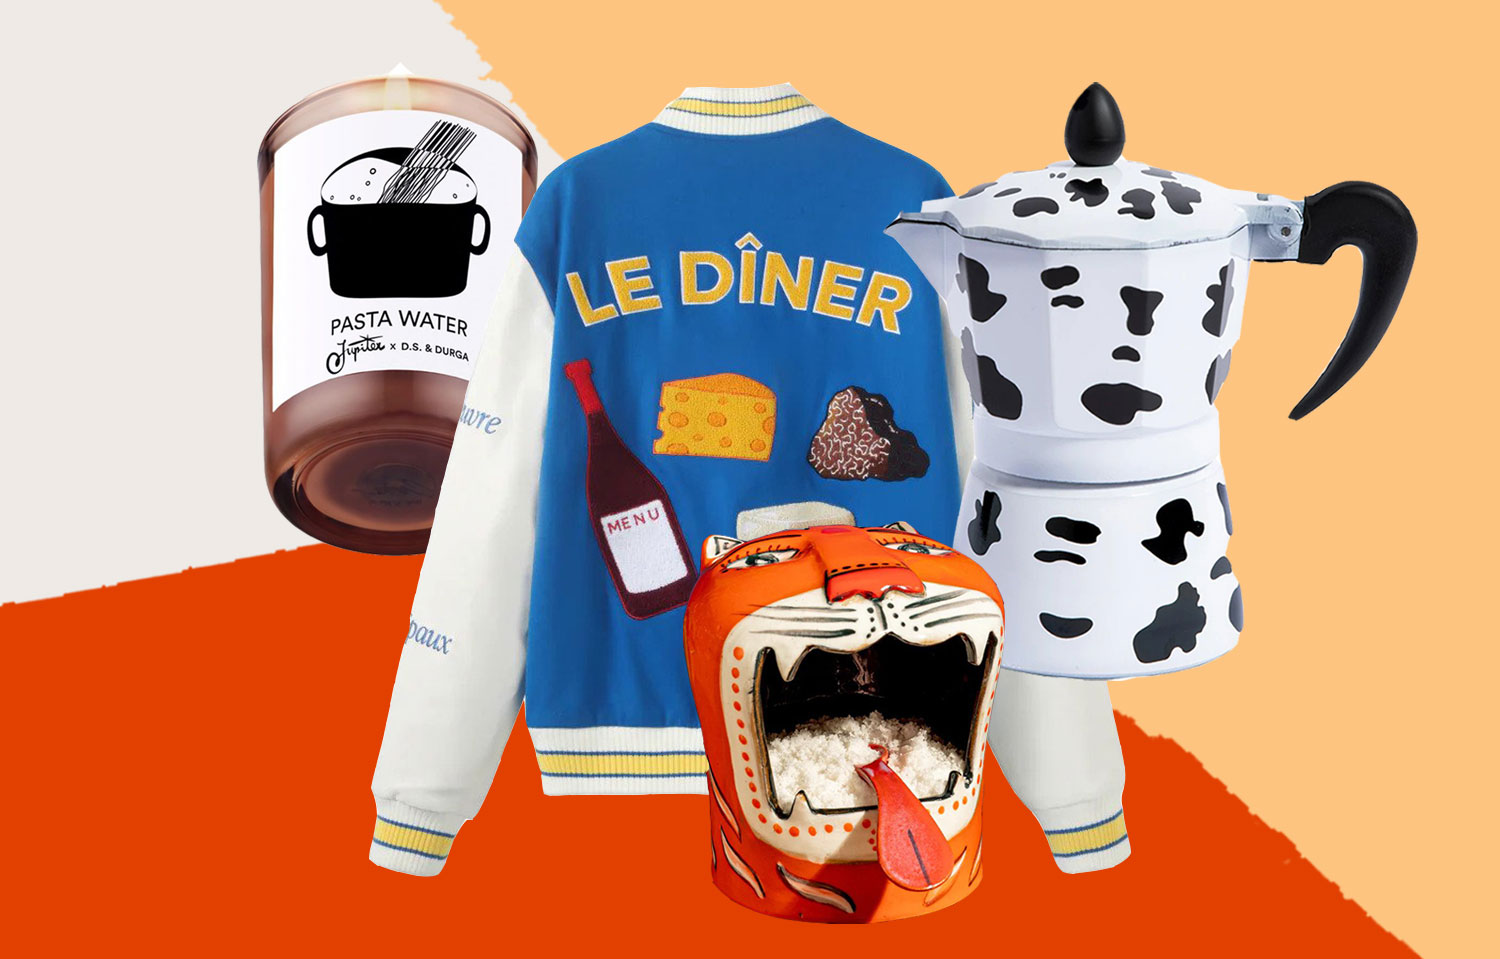 A pasta water candle, Le Diner jacket, moka pot with a cow pattern, and a ceramic salt cellar that looks like a tiger